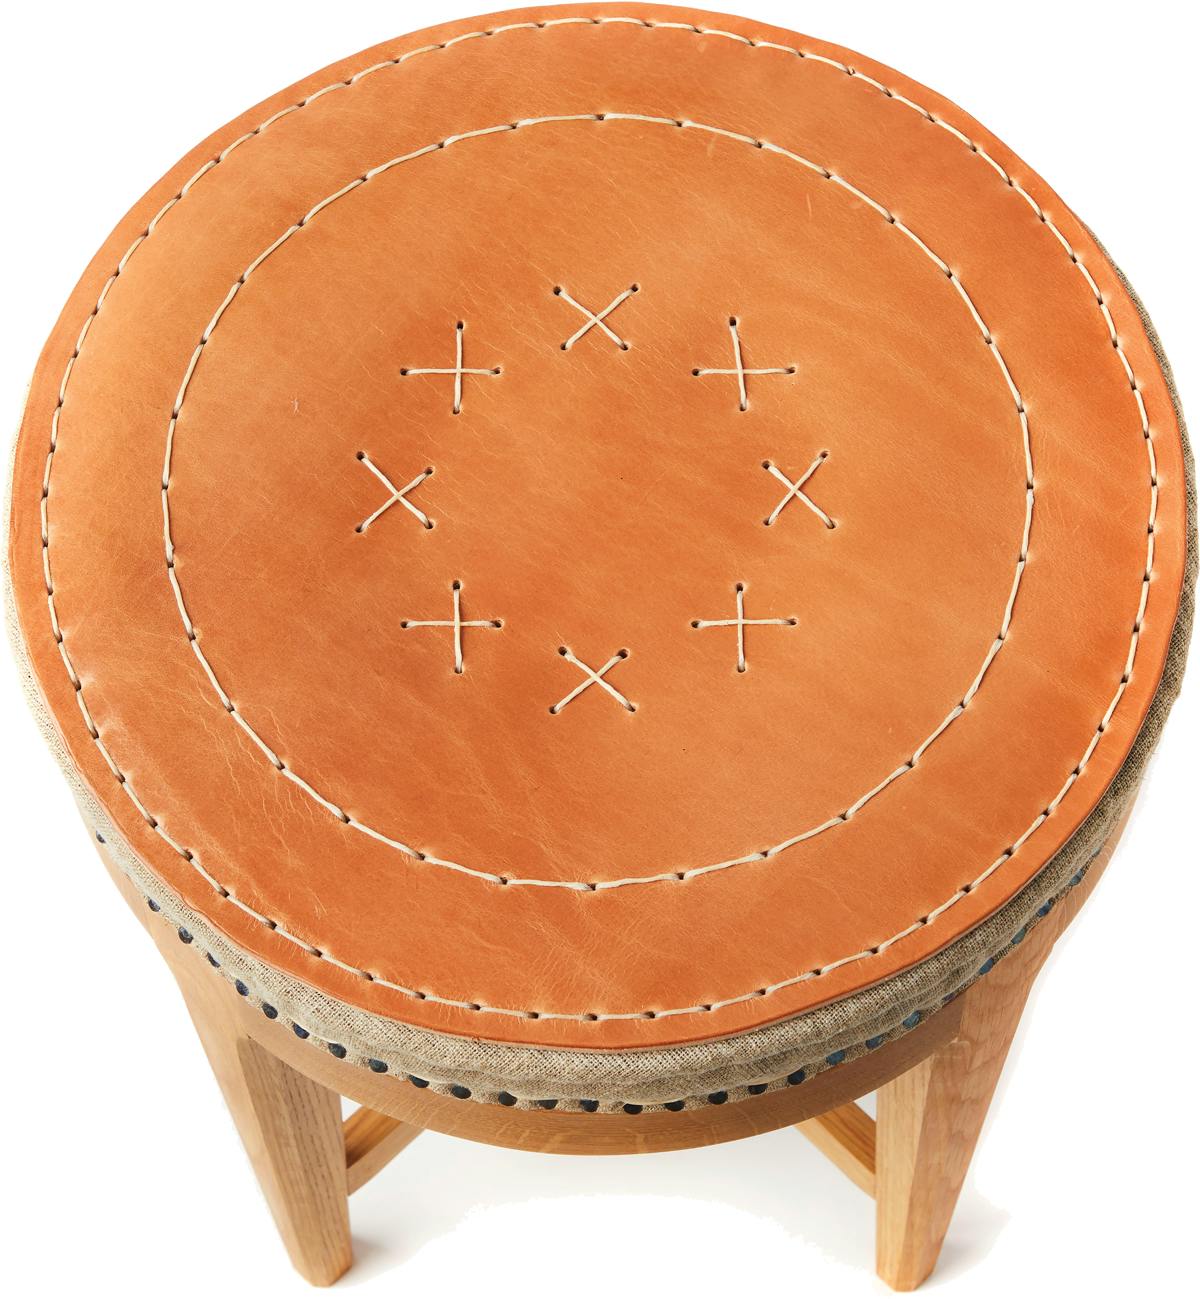 handmade stool with leather top featuring traditional upholstery techniques